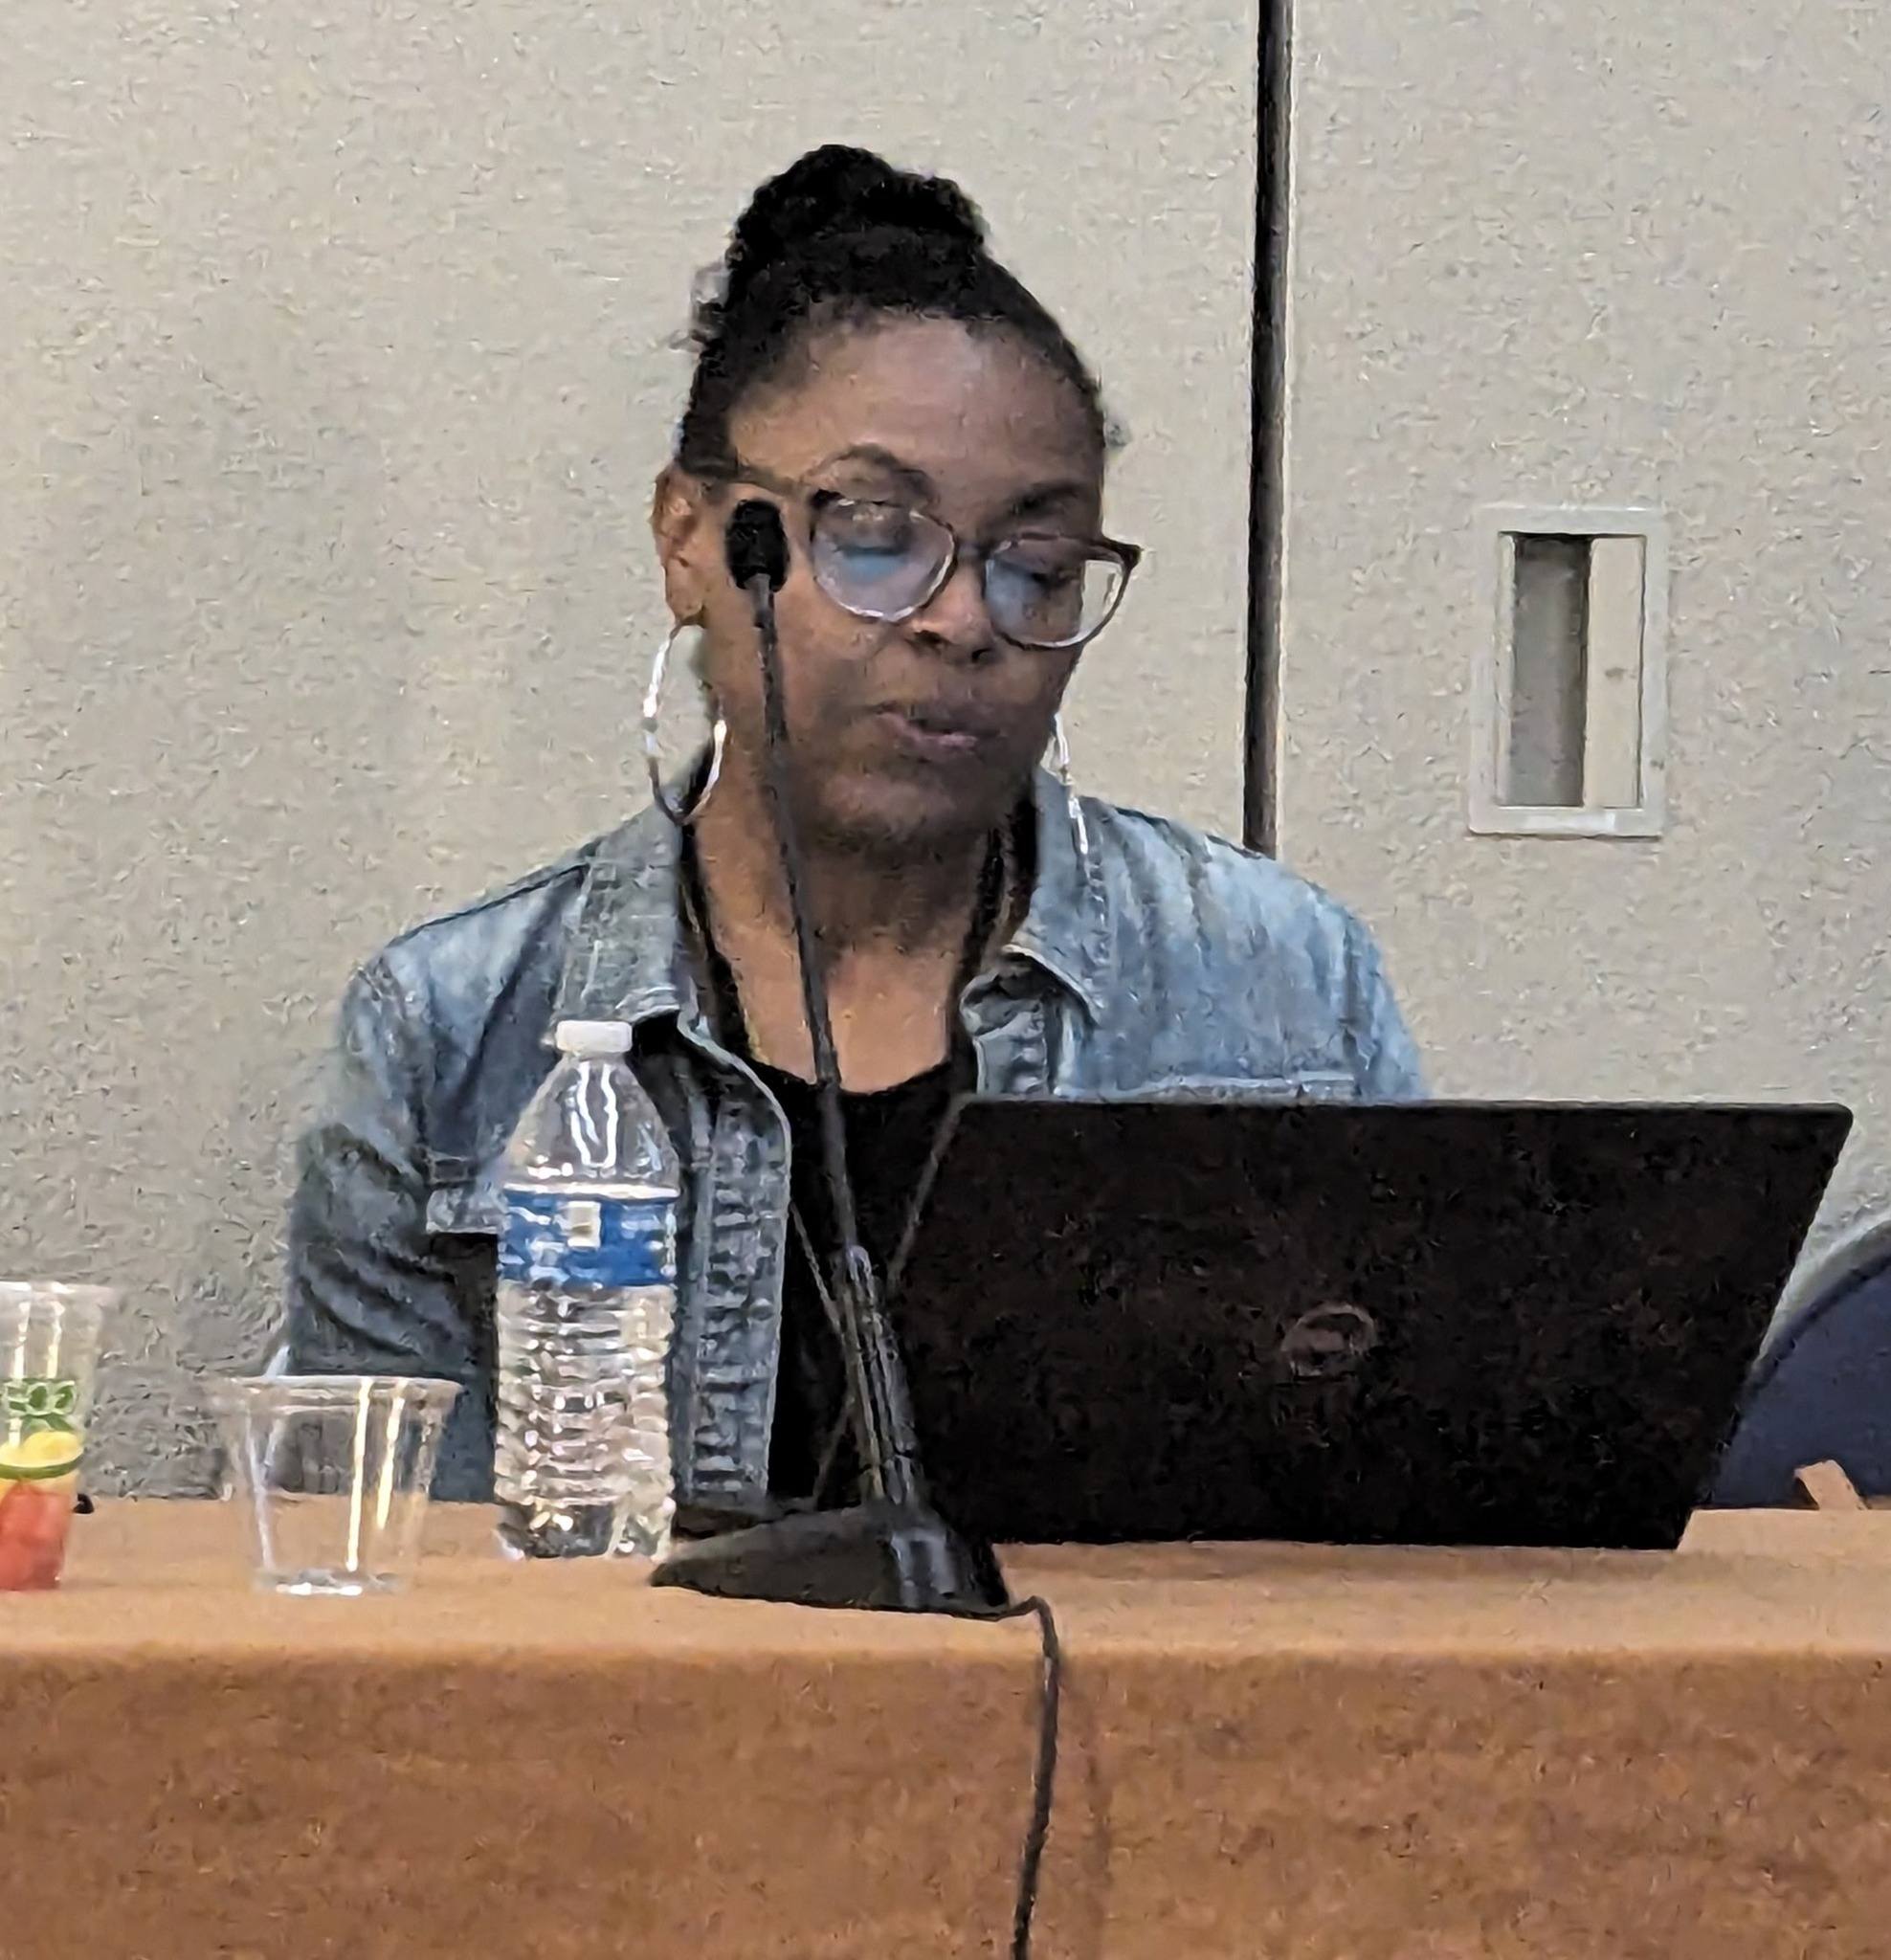 Black woman with glasses and hair pulled back is seated at a table, delivering presentation to audience